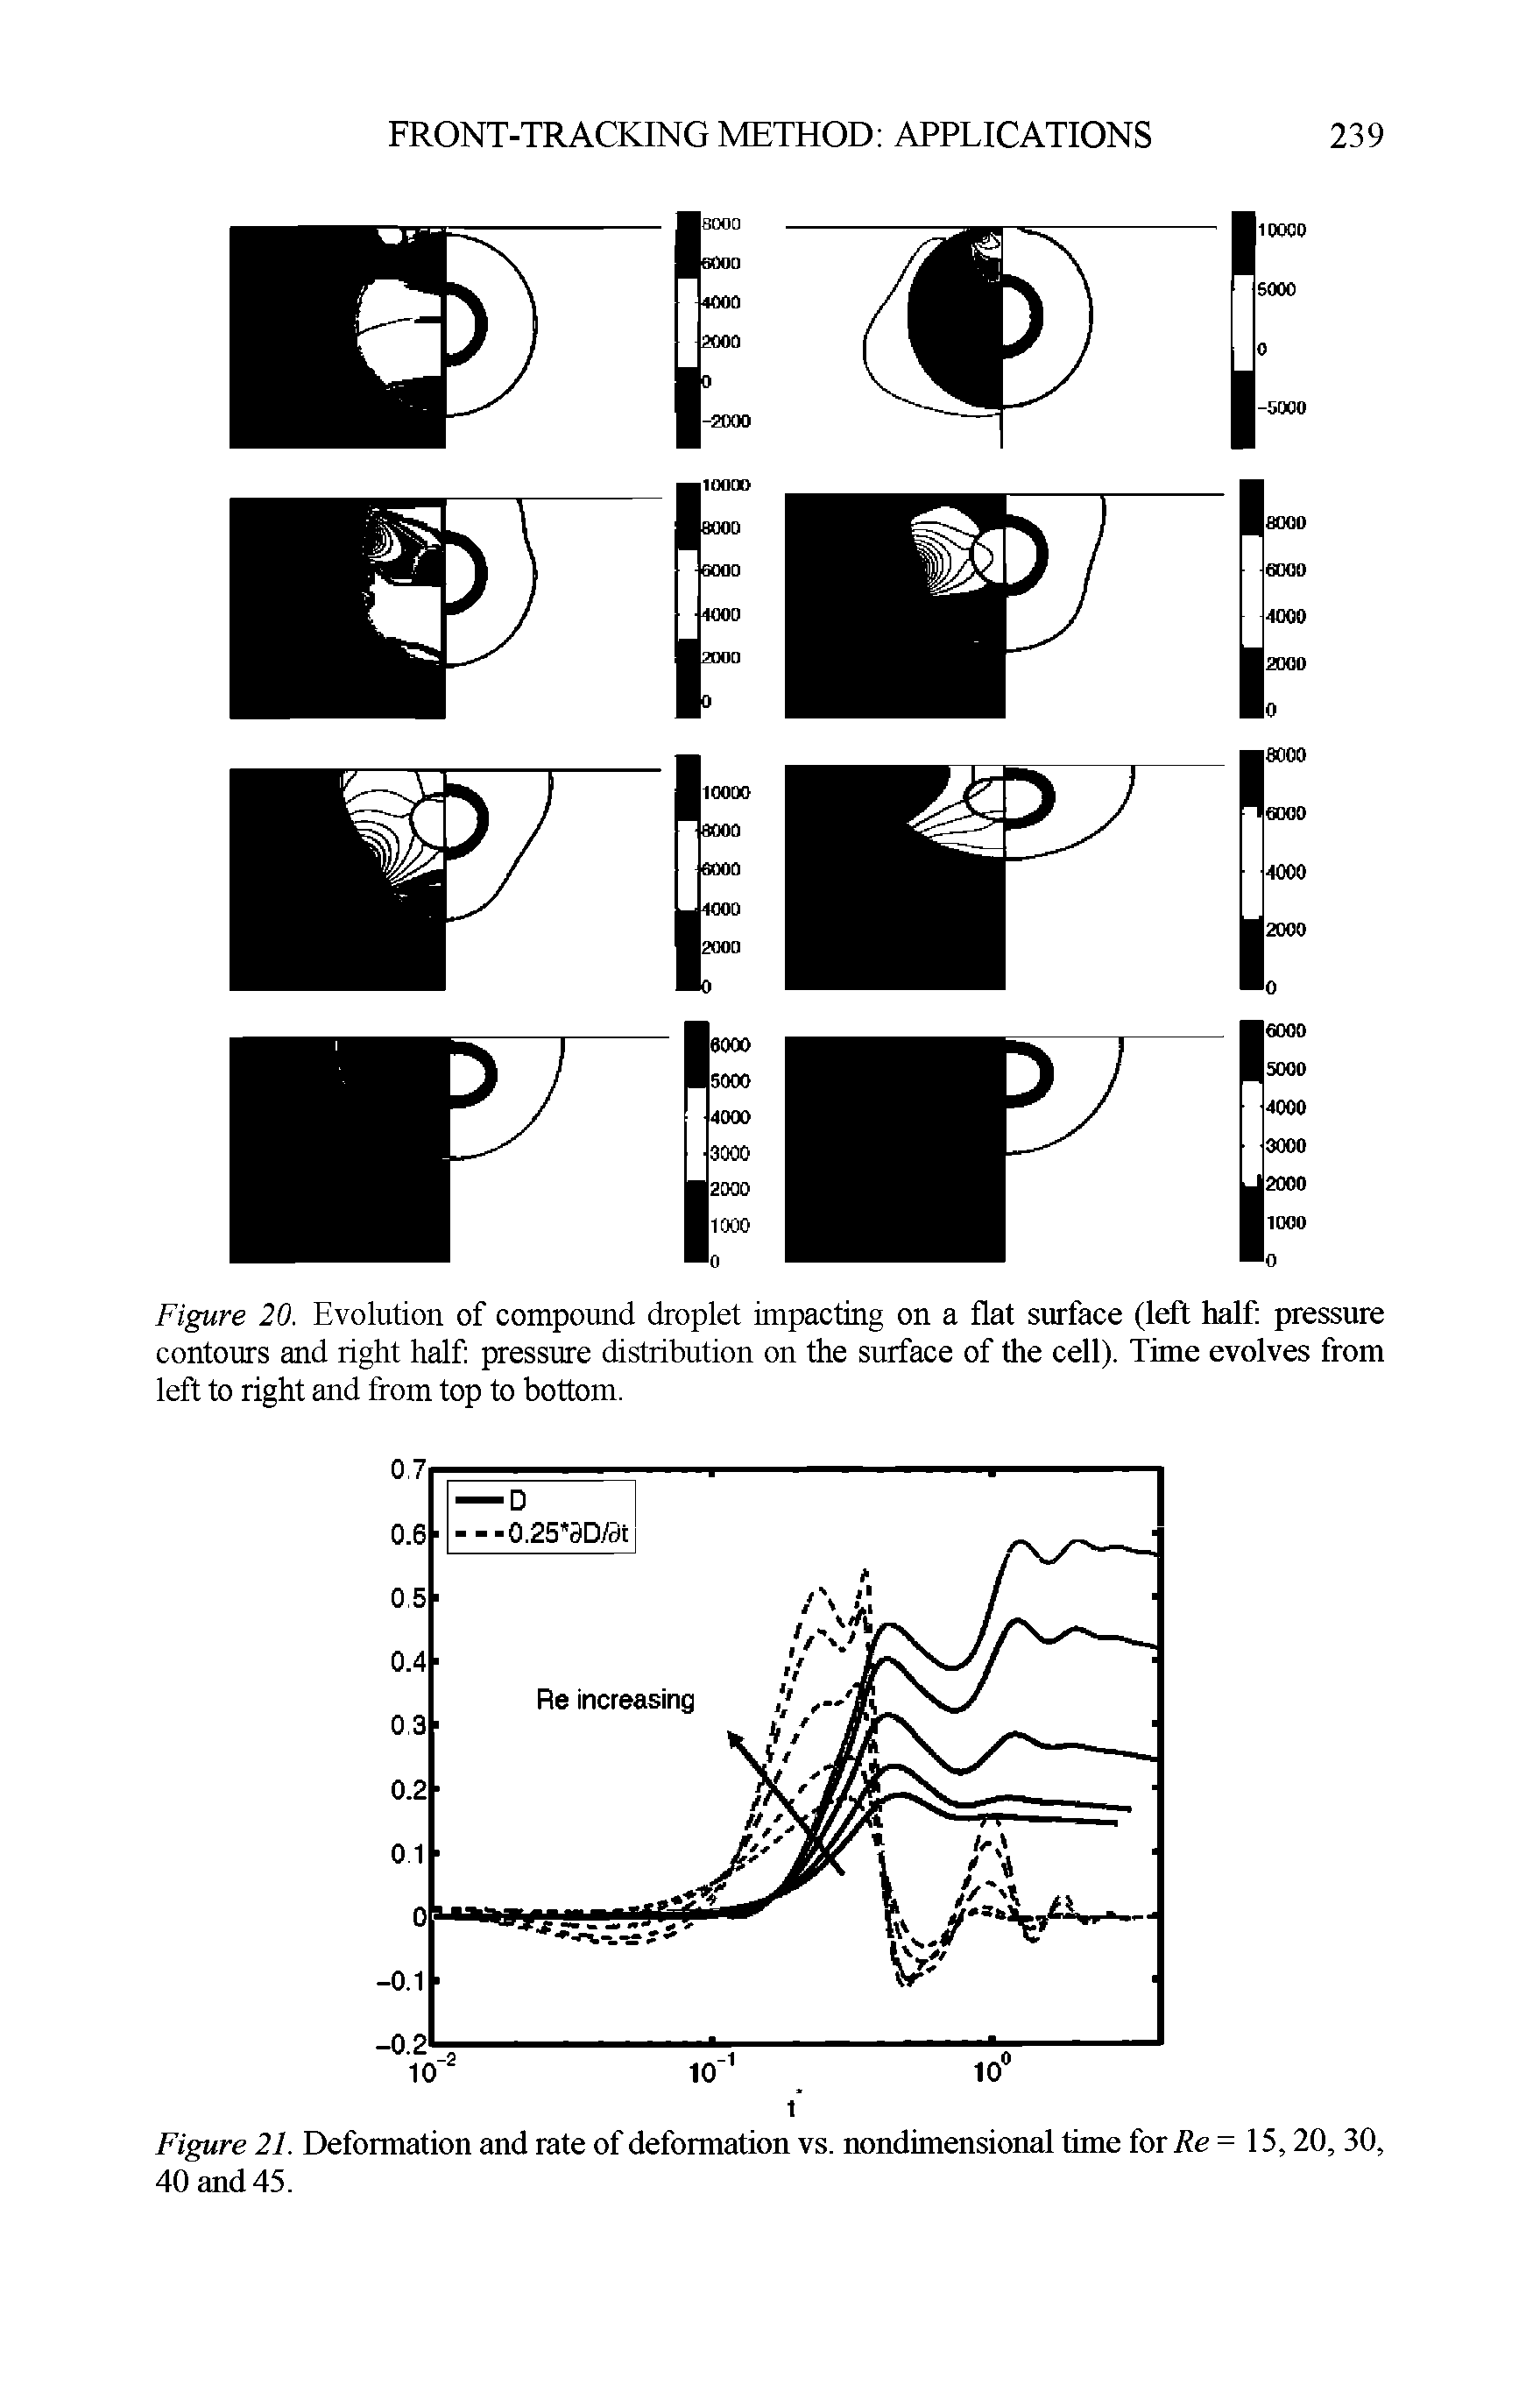 Figure 20. Evolution of compound droplet impacting on a flat surface (left half pressure contours and right half pressure distribution on the surface of the cell). Time evolves from left to right and from top to bottom.